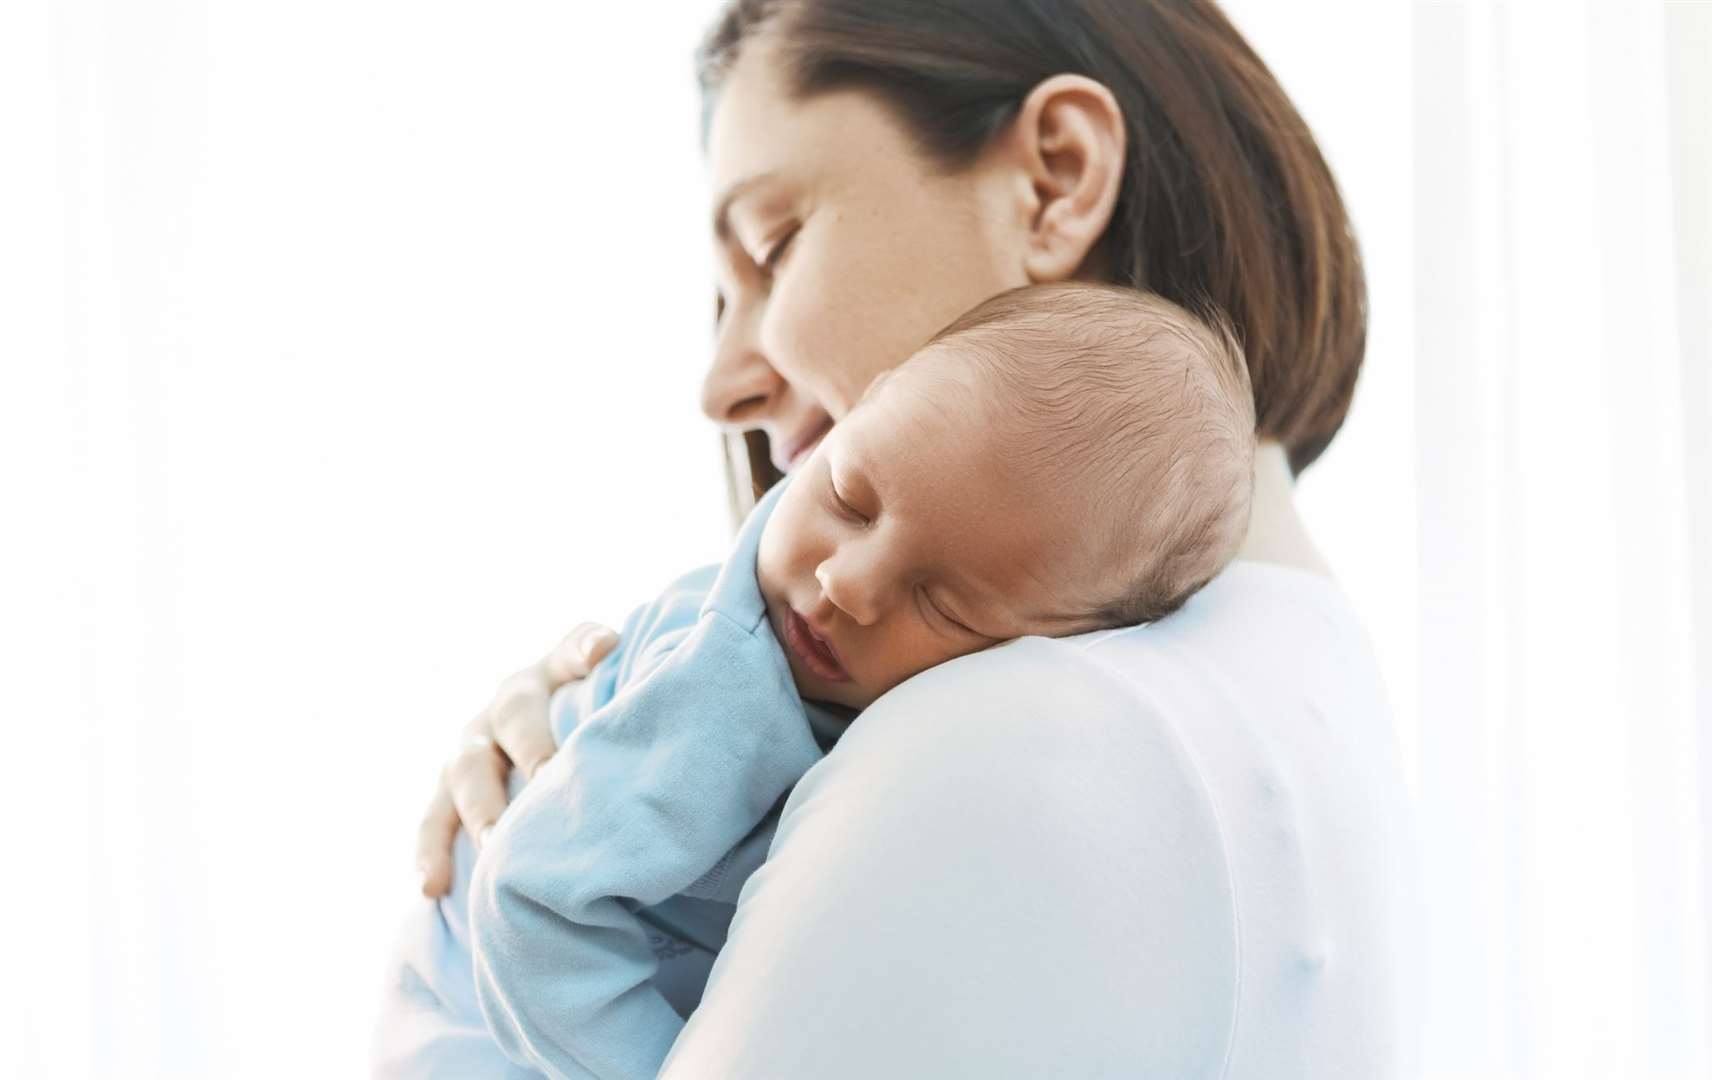 Officials say the pillows don't fit NHS advice about how to safely bottle feed a baby. Image: Stock photo.